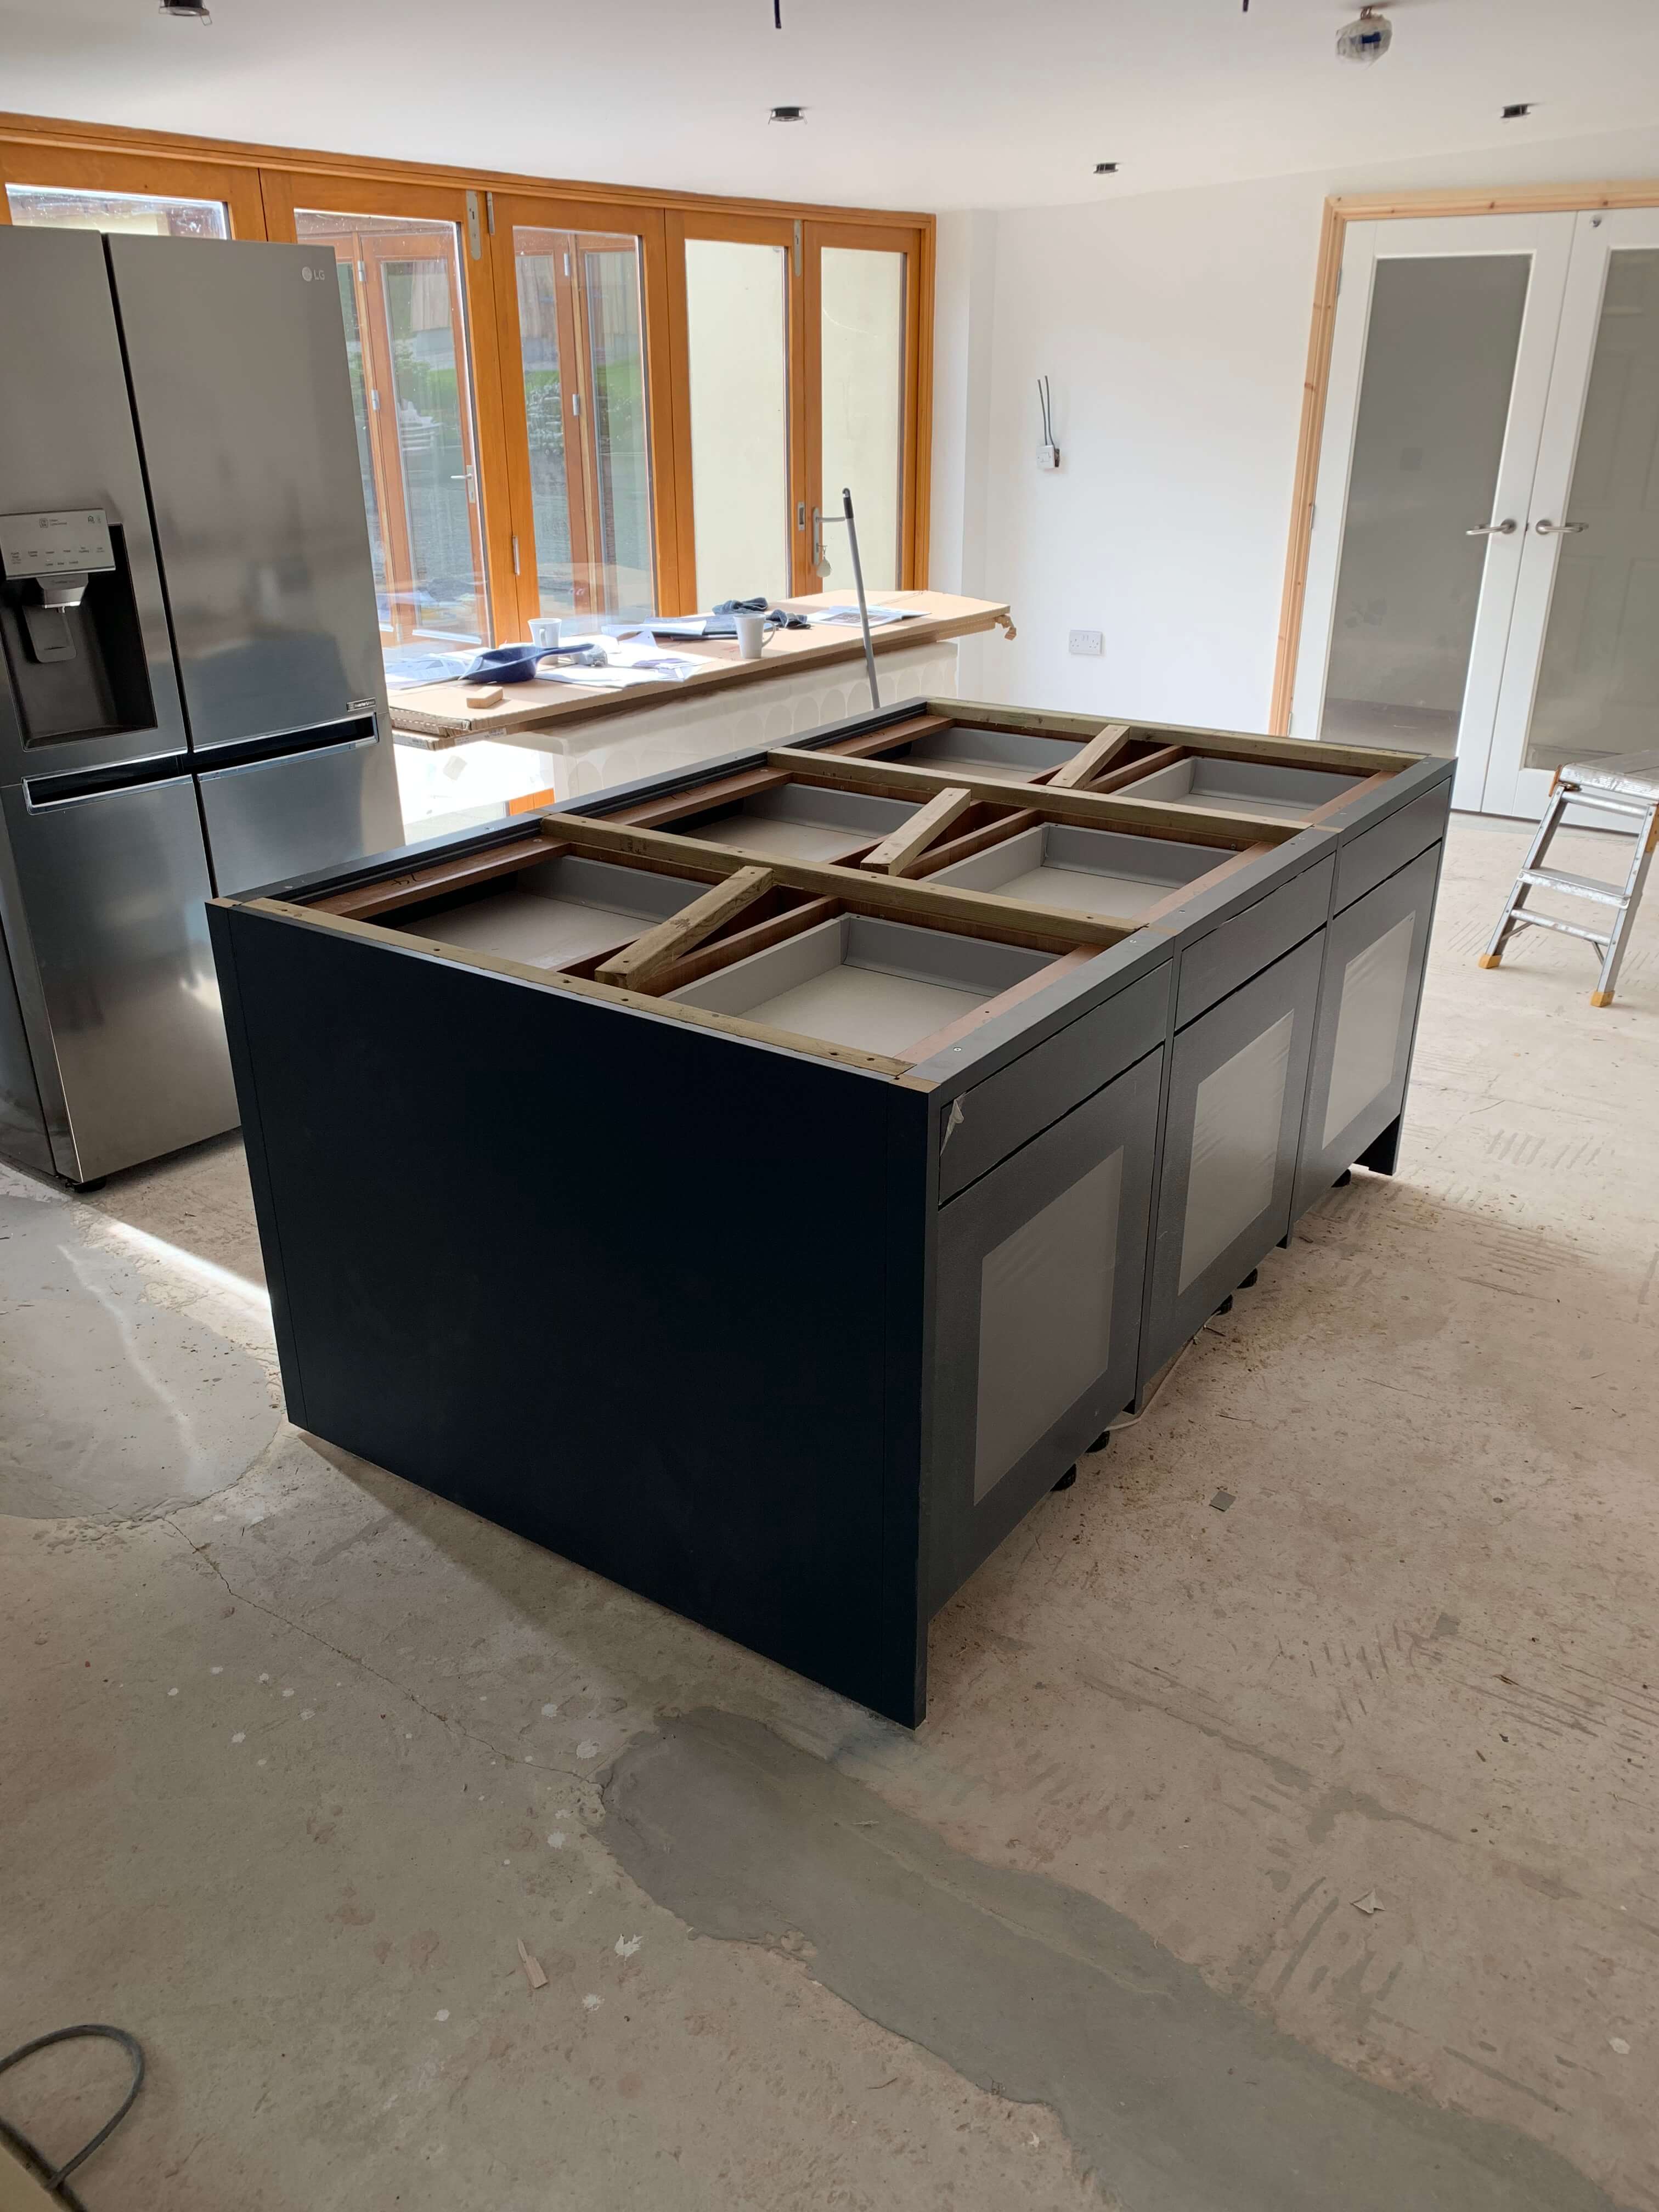 Island cabinets ready for the worktop